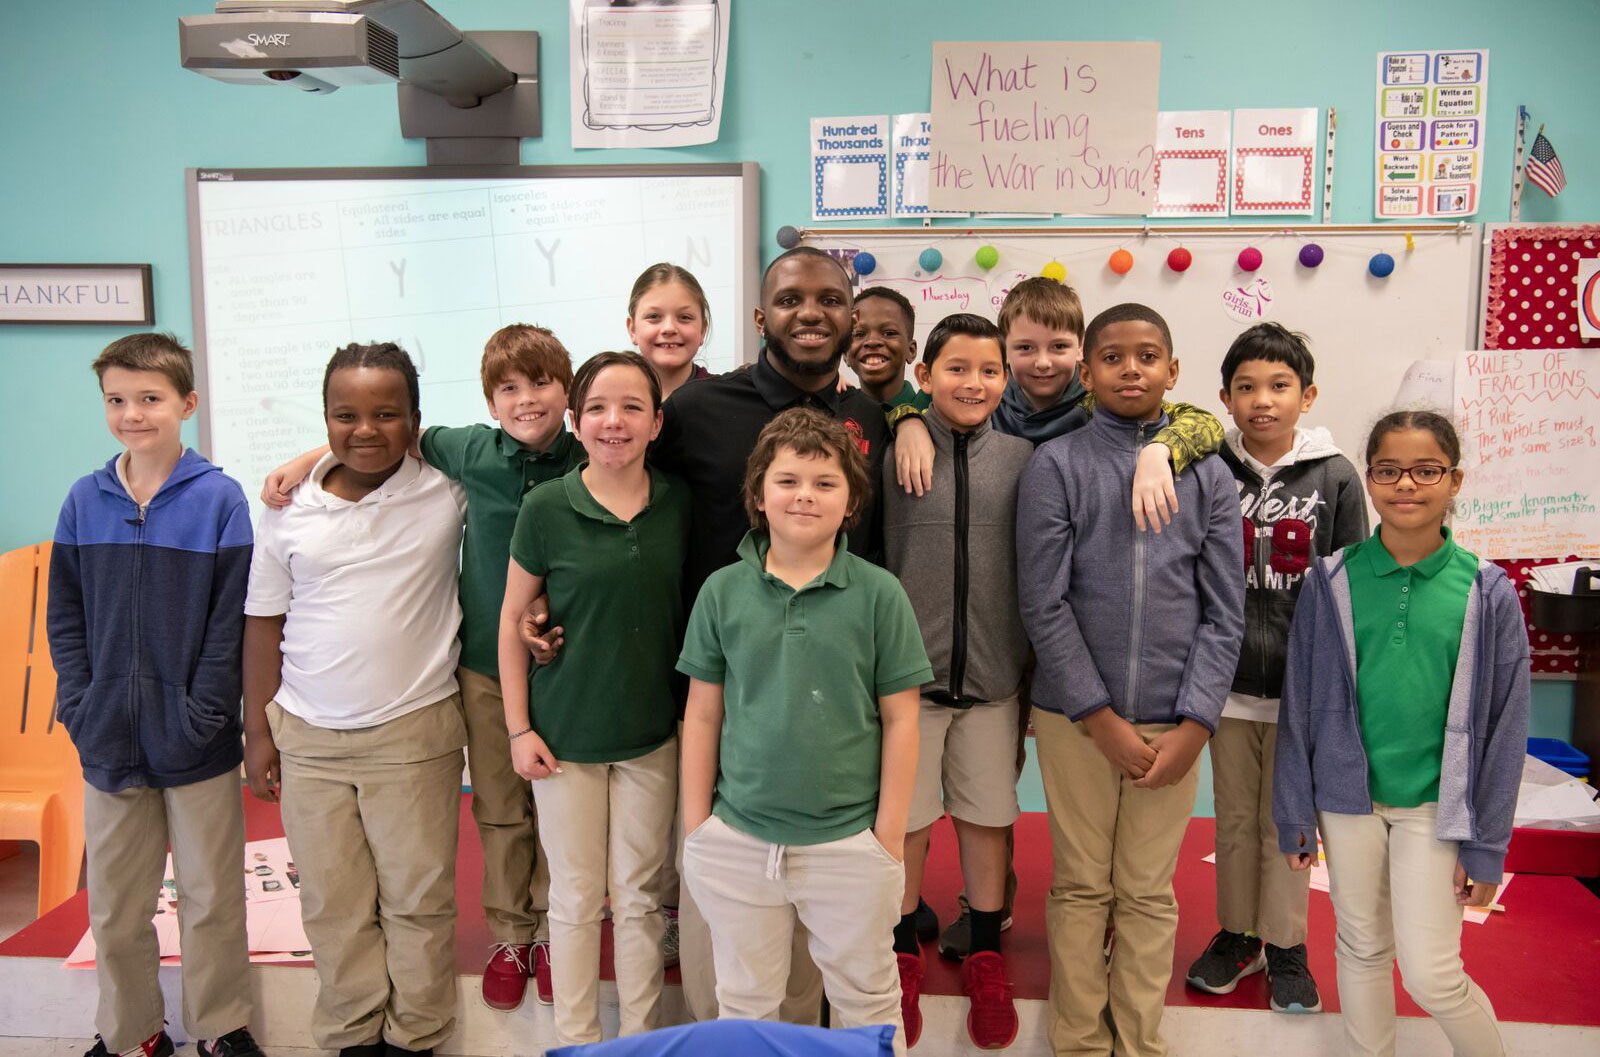 Devin Rankin with students from his class